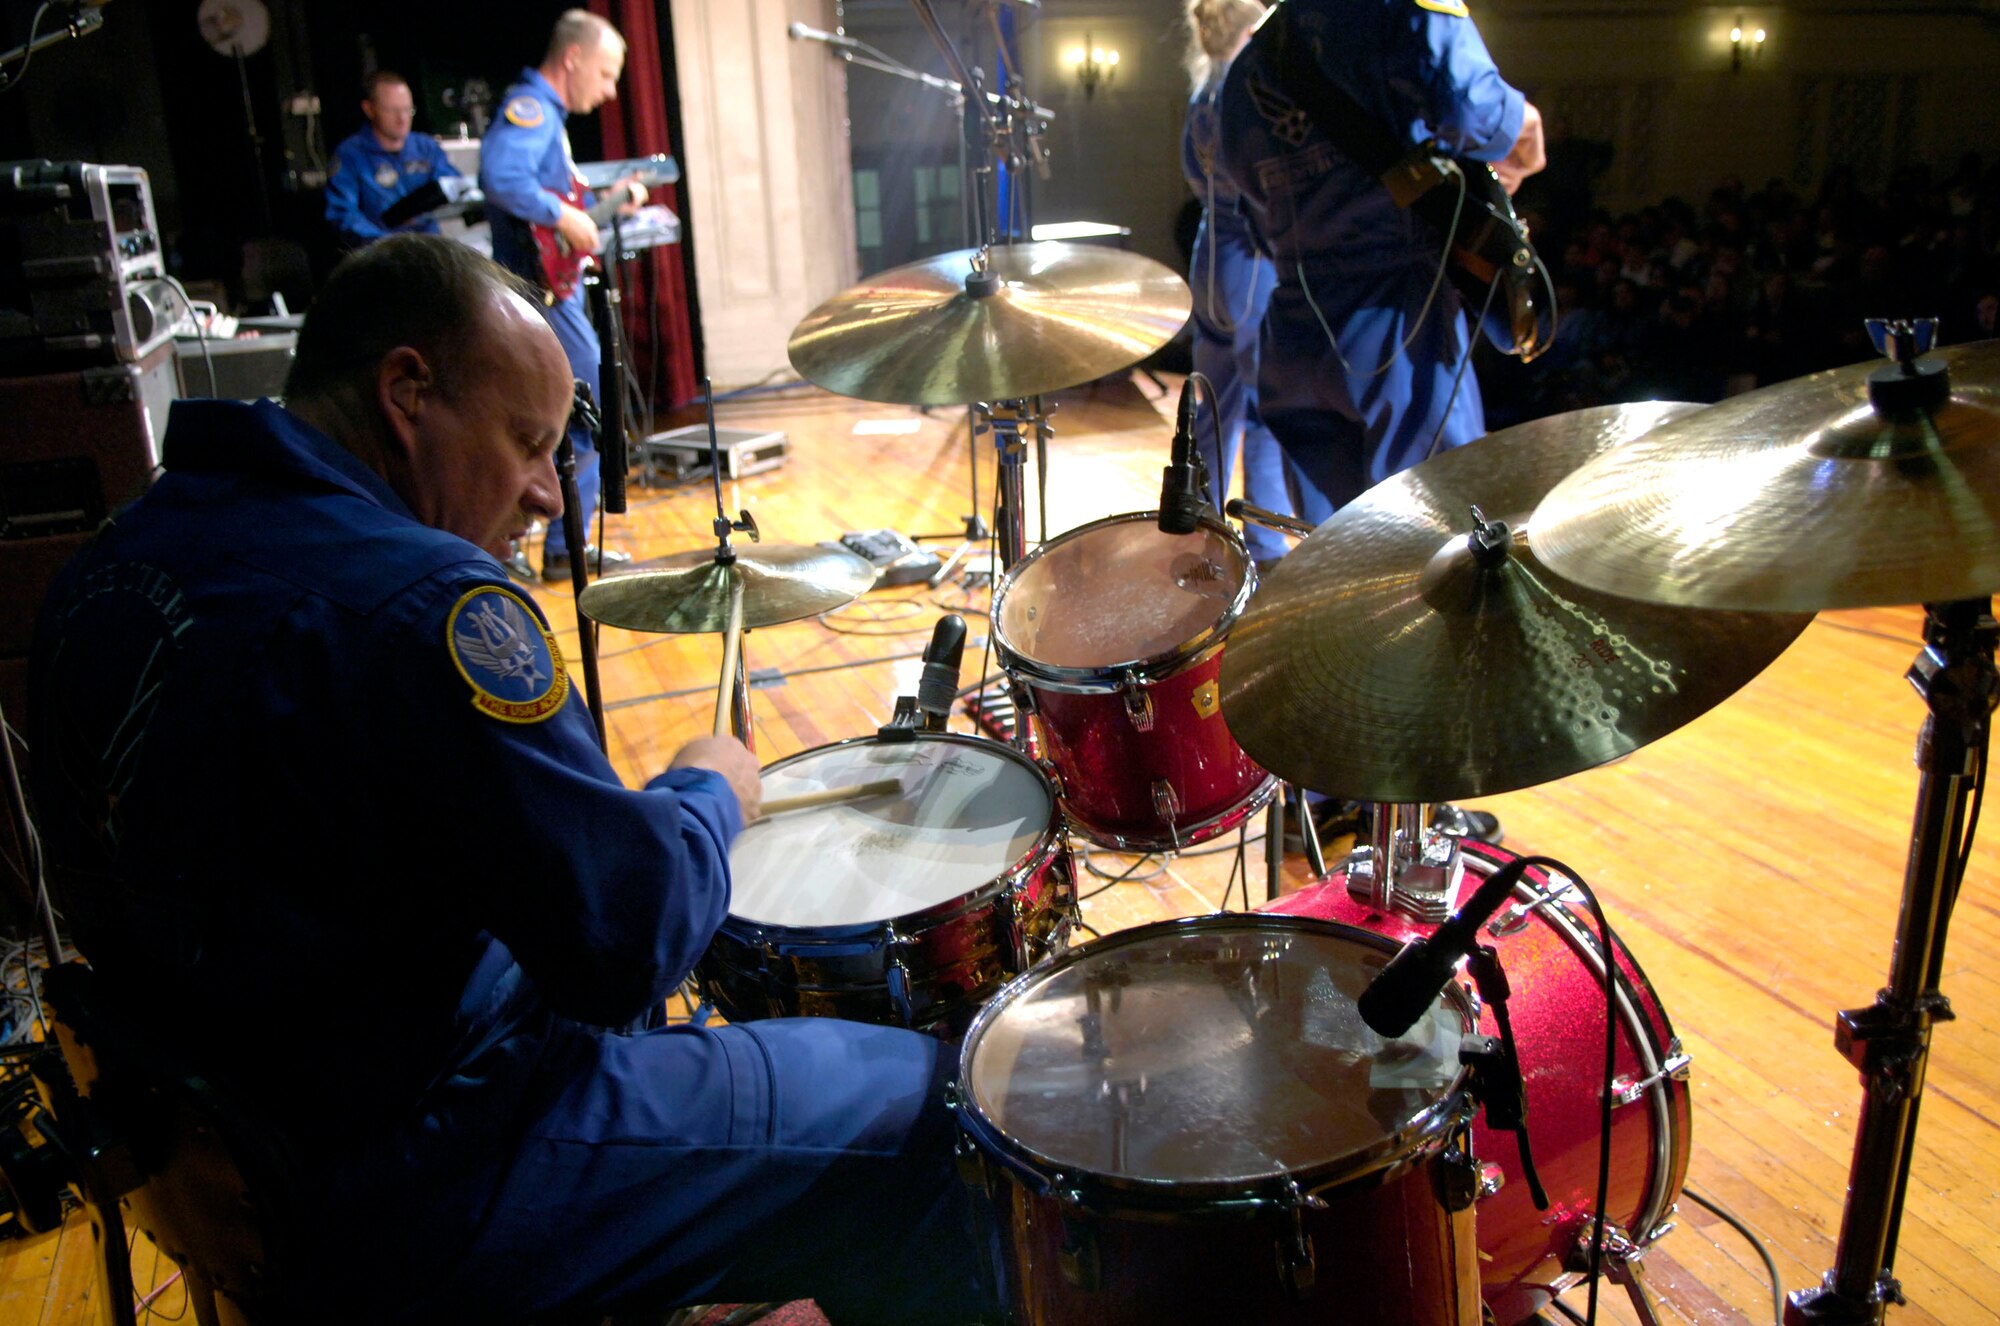 Senior Master Sgt. Scott Barbier plays the drums during a concert for students at Mamaroneck High School in New York, Nov. 22. Sergeant Barbier is part of the U.S. Air Force Academy Band, Blue Steel, which performed at the school in celebration of the Air Force's 60th Anniversary.  The band will also perform in the Macy's Thanksgiving Day Parade. (U.S. Air Force photo/Senior Airman Brian Ferguson)

